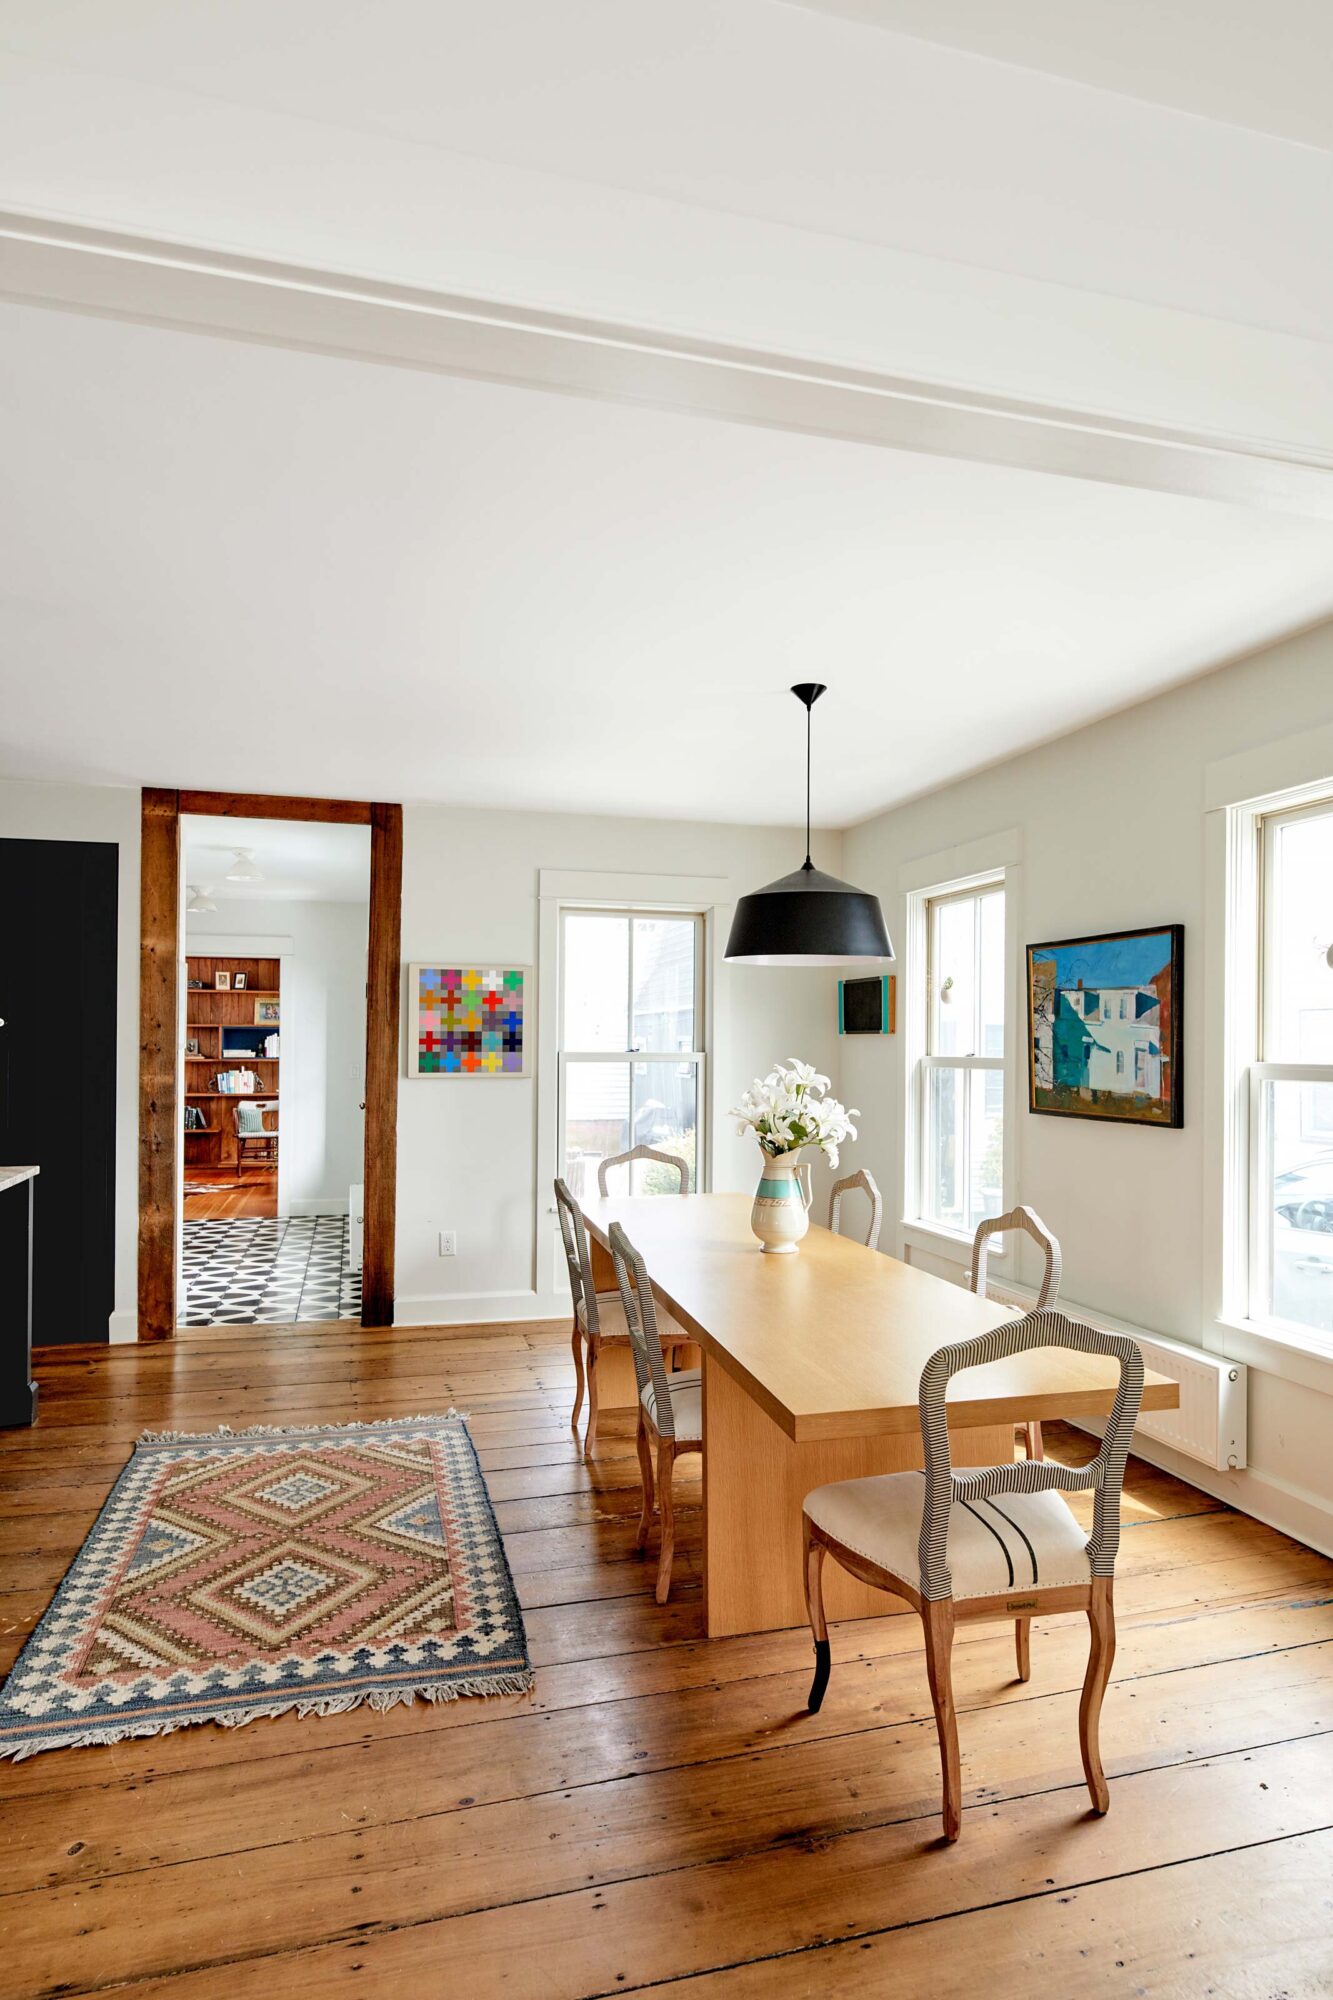  The dining room table was purchased from former Rockport gallerist Edith Caldwell, who’d had it custom made. For years, it’s hosted family gatherings—and, hopefully, soon friends again. 